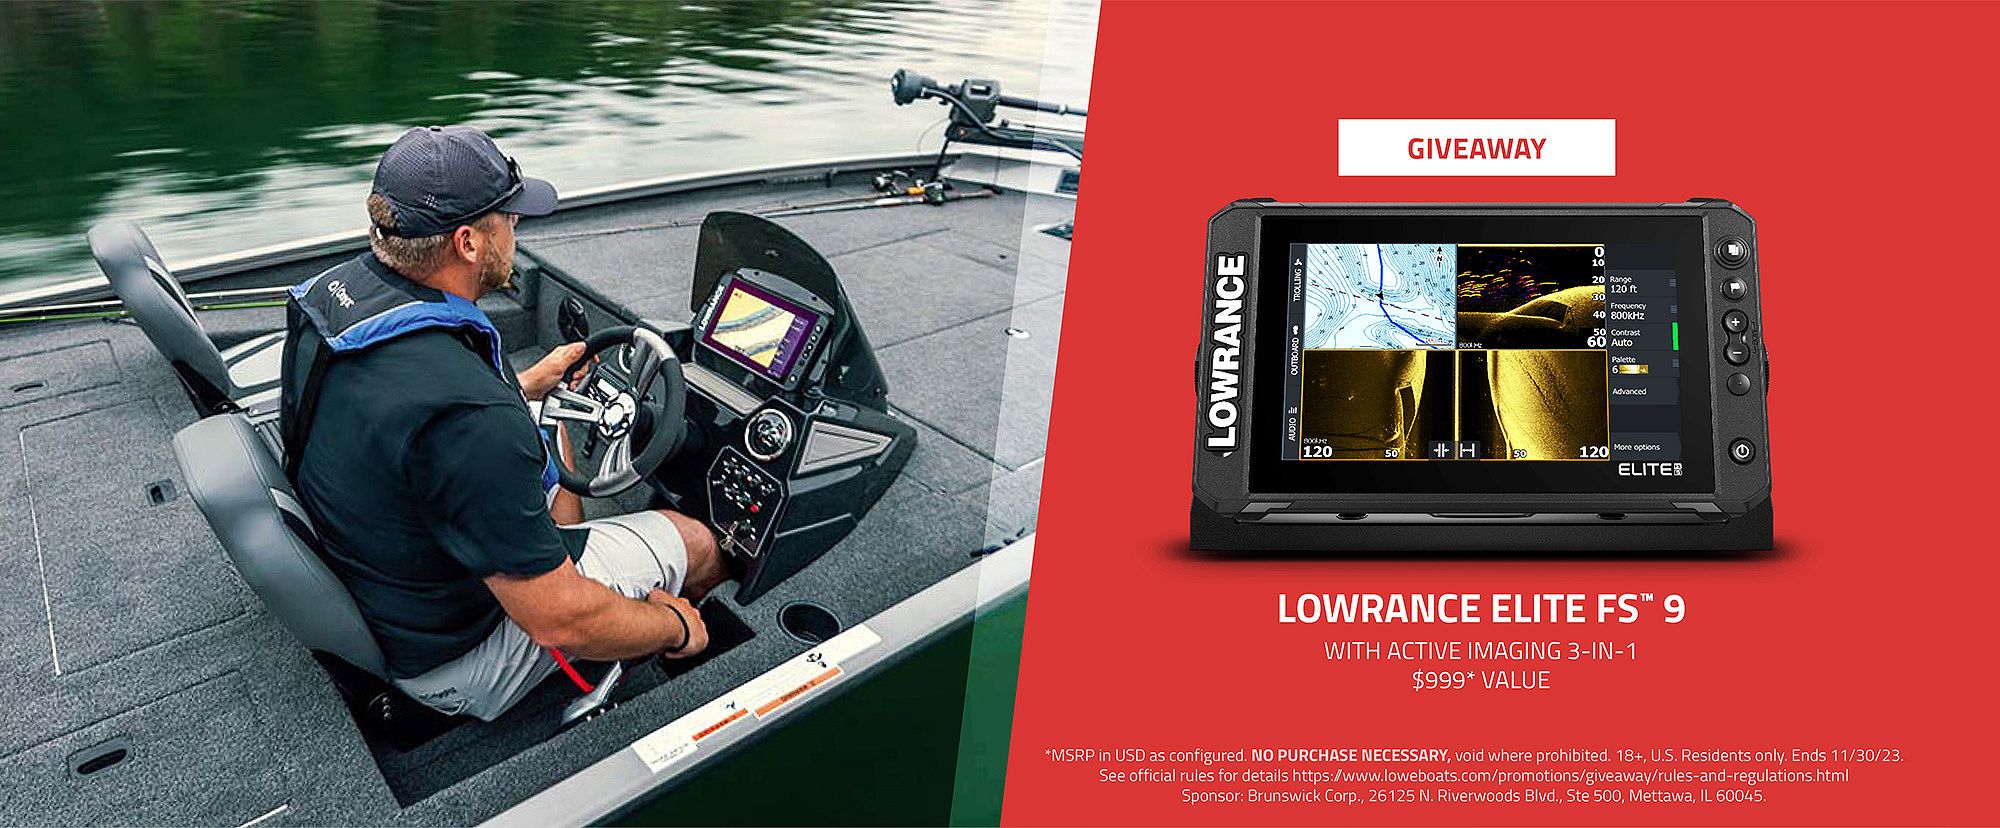 Lowrance FIsh Finder featured on a Lowe Stinger 195 Bass